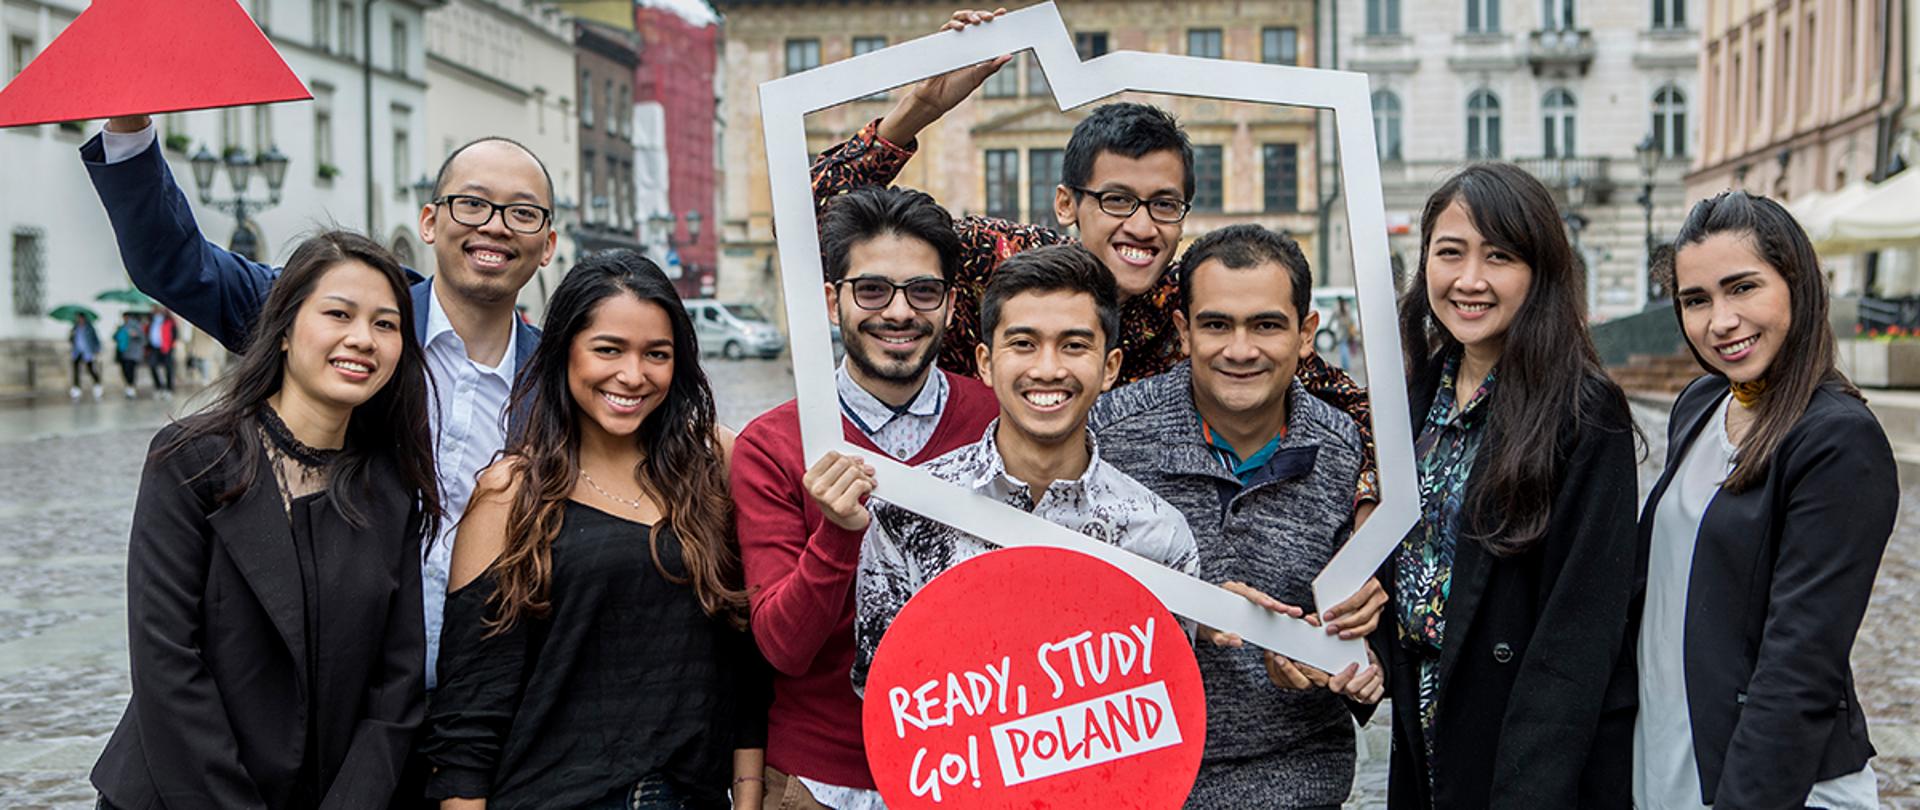 Poland at Study in Europe fairs